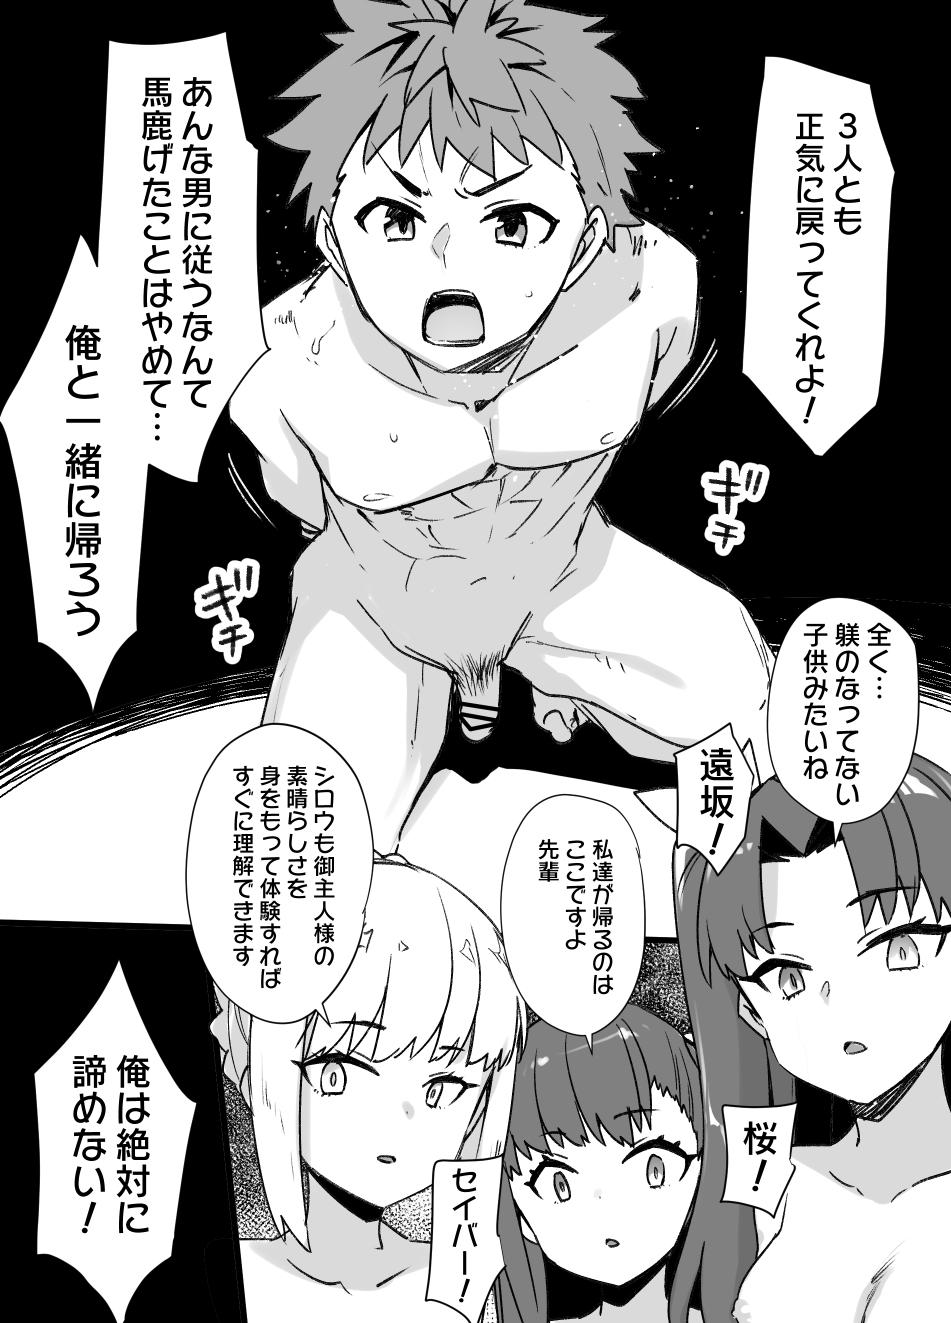 Ginger A manga about Shirou Emiya who went to save Rin Tohsaka from captivity and is transformed into a female slave through physical feminization and brainwashing[Fate/ stay night) - Fate stay night Pattaya - Page 7